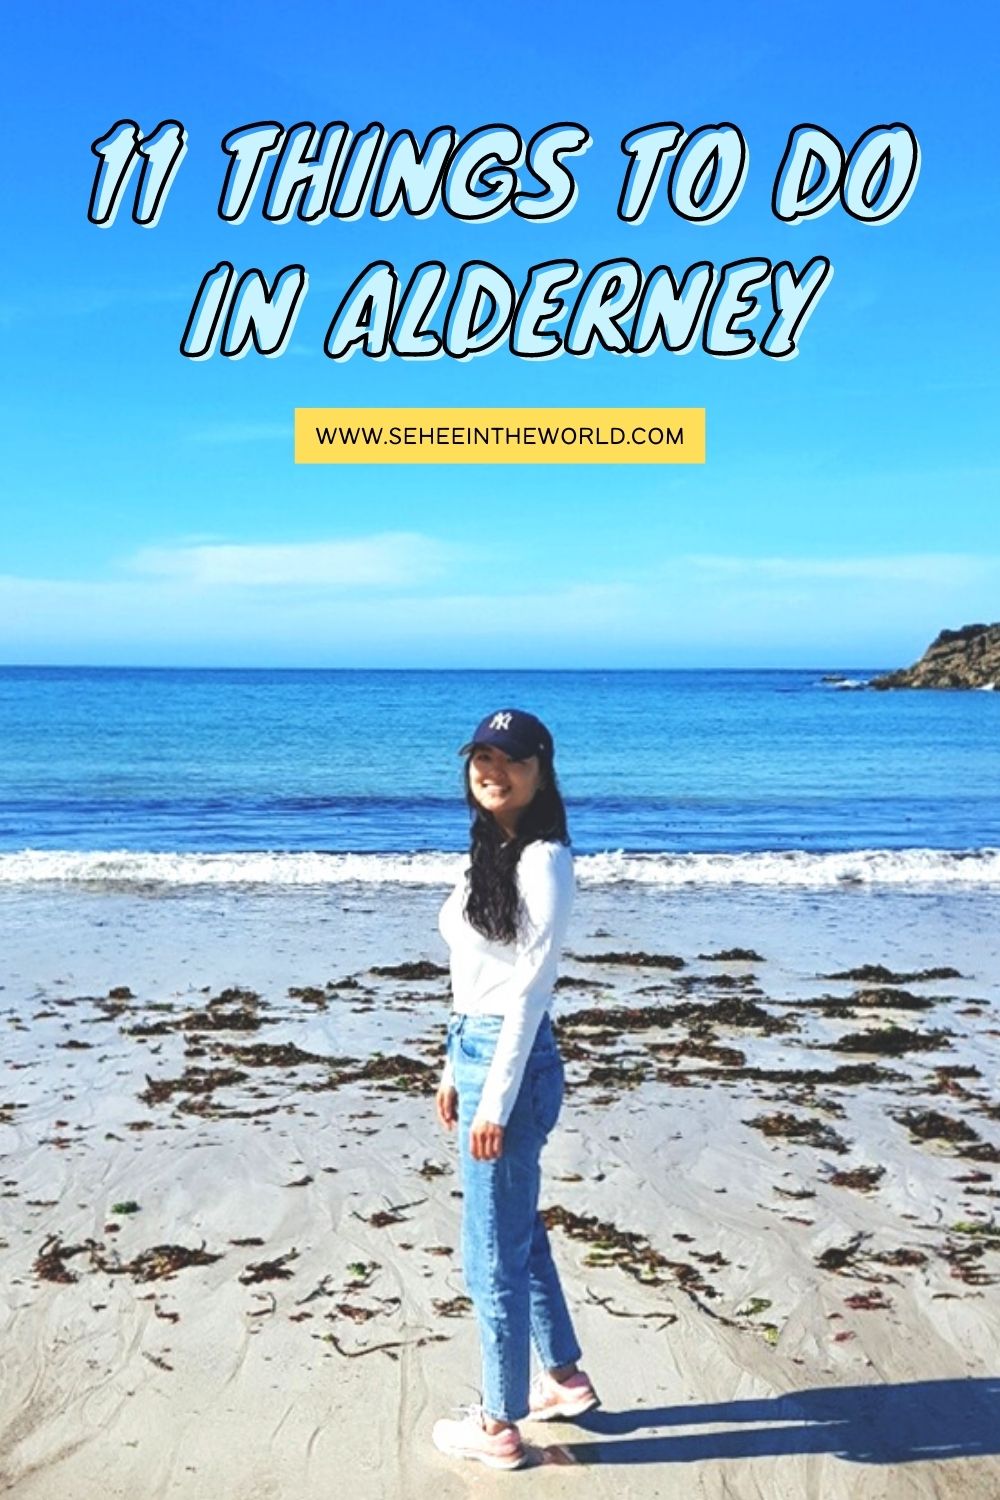 11 Things to Do in Alderney (single image) - Sehee in the World - Pinterest